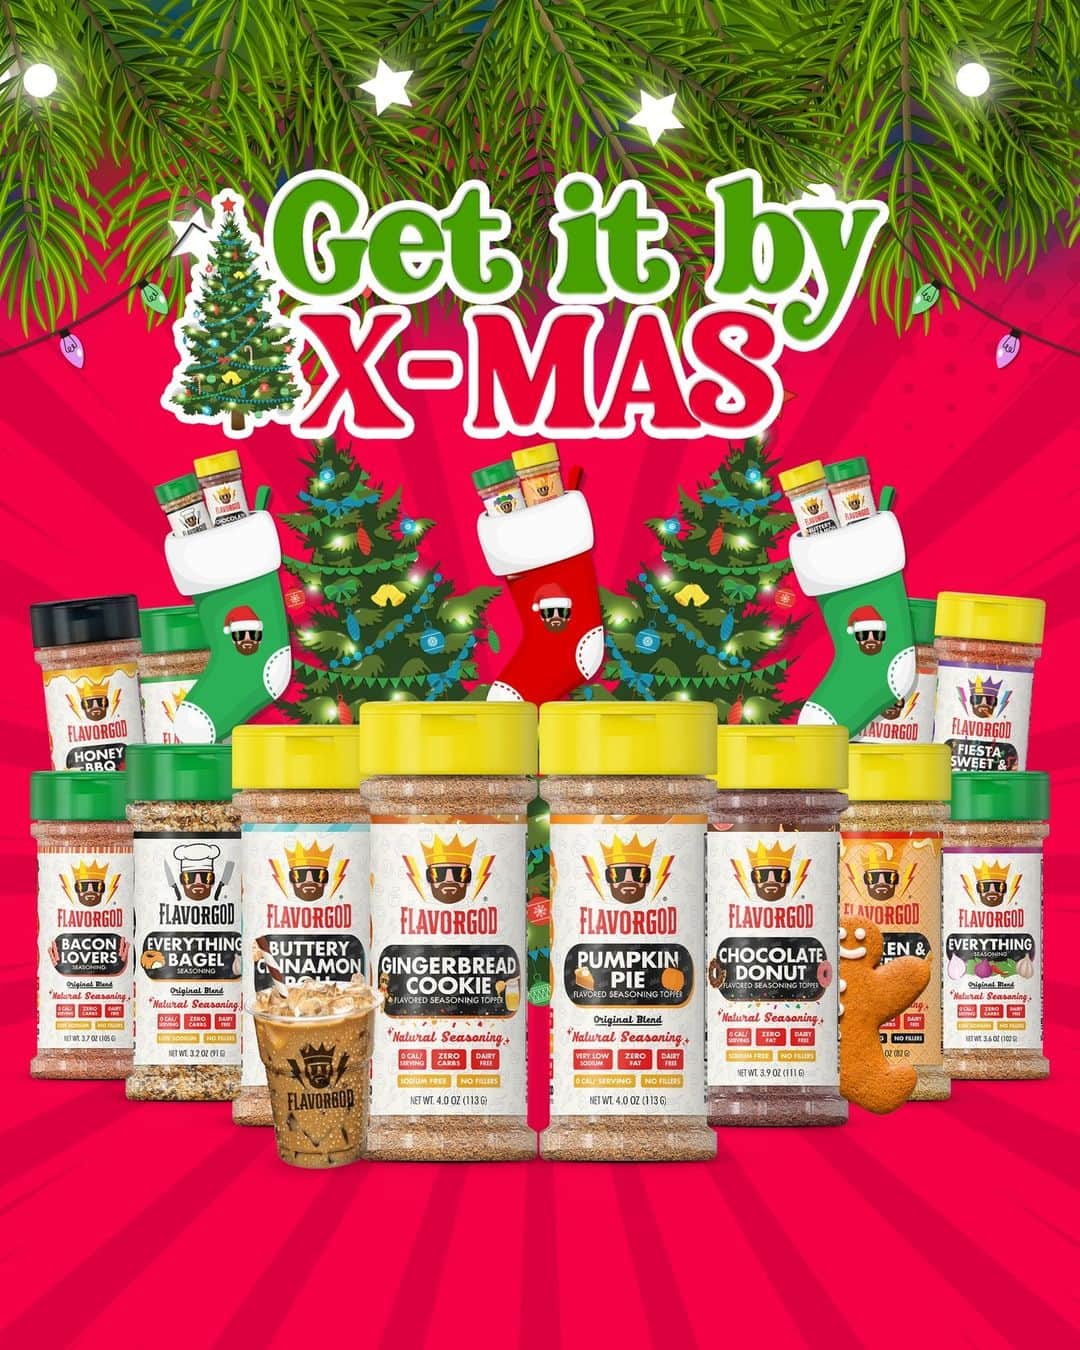 Flavorgod Seasoningsのインスタグラム：「🎅❗Get it before Christmas! 🎁❗Shop Now!!⁠ Click link in the bio -> @flavorgod | www.flavorgod.com⁠🎄🎅⁠ -⁠ Flavor God Seasonings are:⁠ 🎅ZERO CALORIES PER SERVING⁠ 🎄MADE FRESH⁠ 🎅MADE LOCALLY IN US⁠ 🎄FREE GIFTS AT CHECKOUT⁠ 🎅GLUTEN FREE⁠ 🎄#PALEO & #KETO FRIENDLY⁠ -⁠ #food #foodie #flavorgod #seasonings #glutenfree #mealprep #seasonings #breakfast #lunch #dinner #yummy #delicious #foodporn」